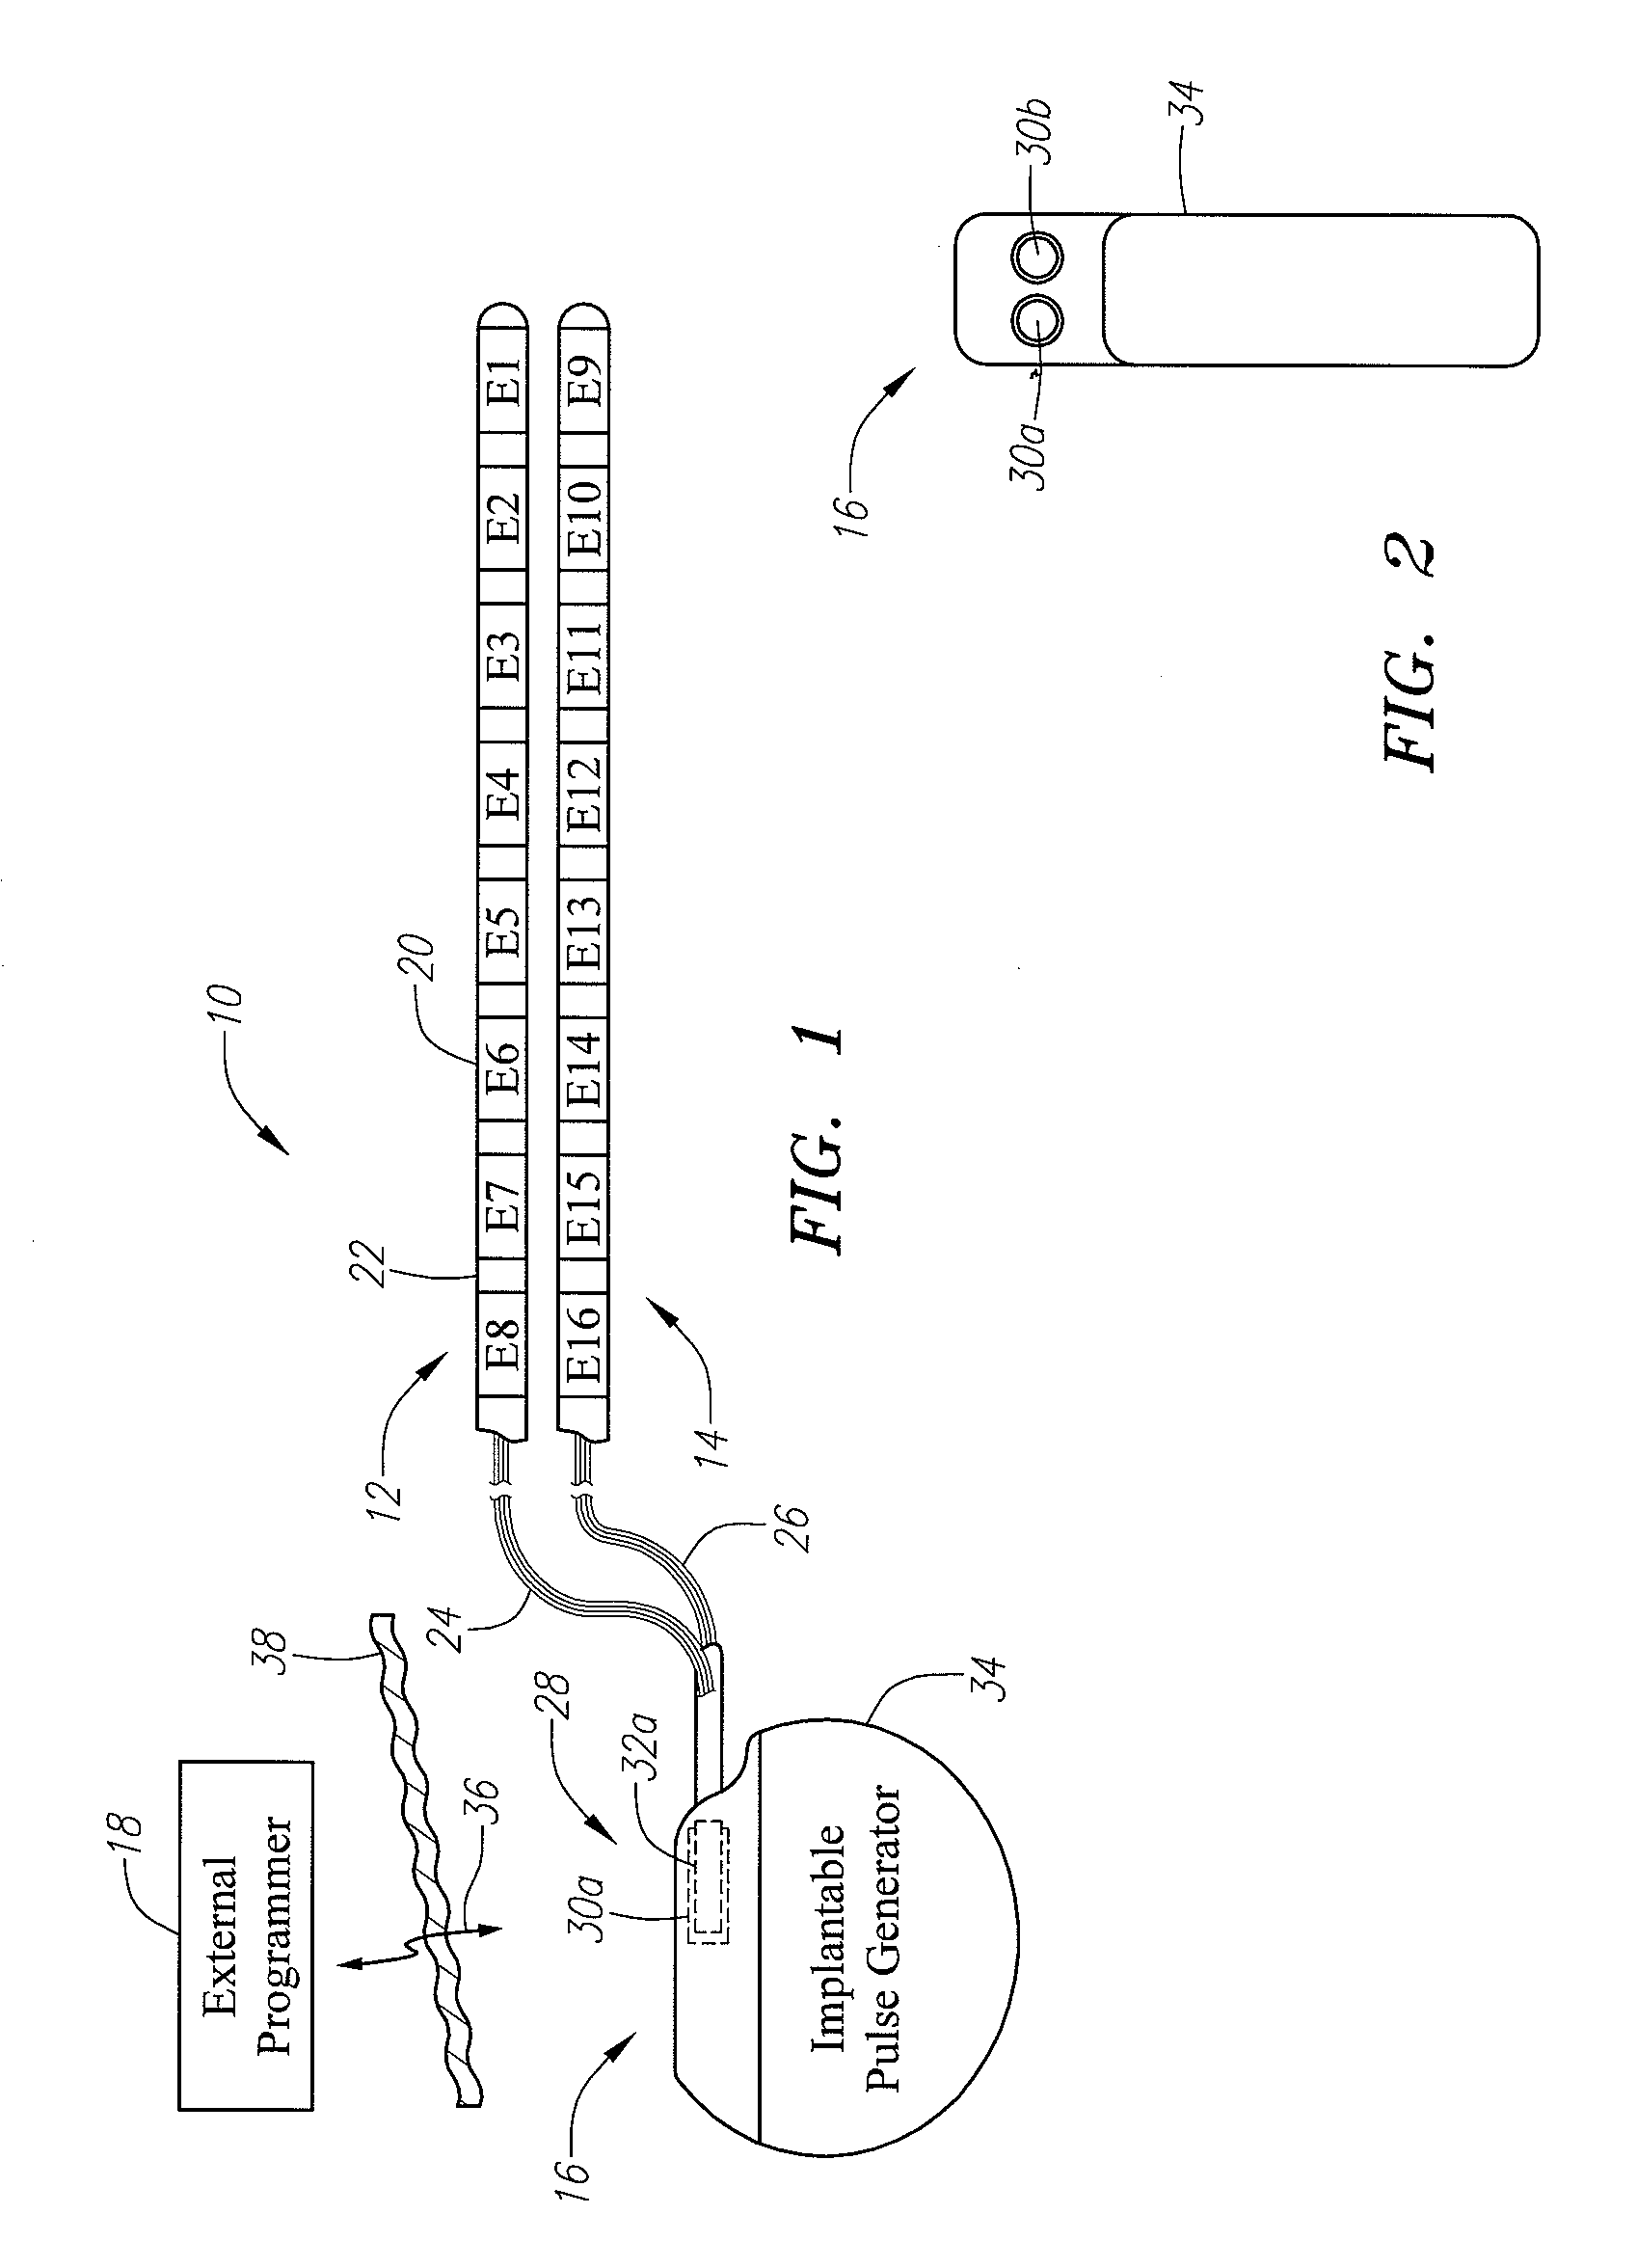 System and method for computationally determining migration of neurostimulation leads